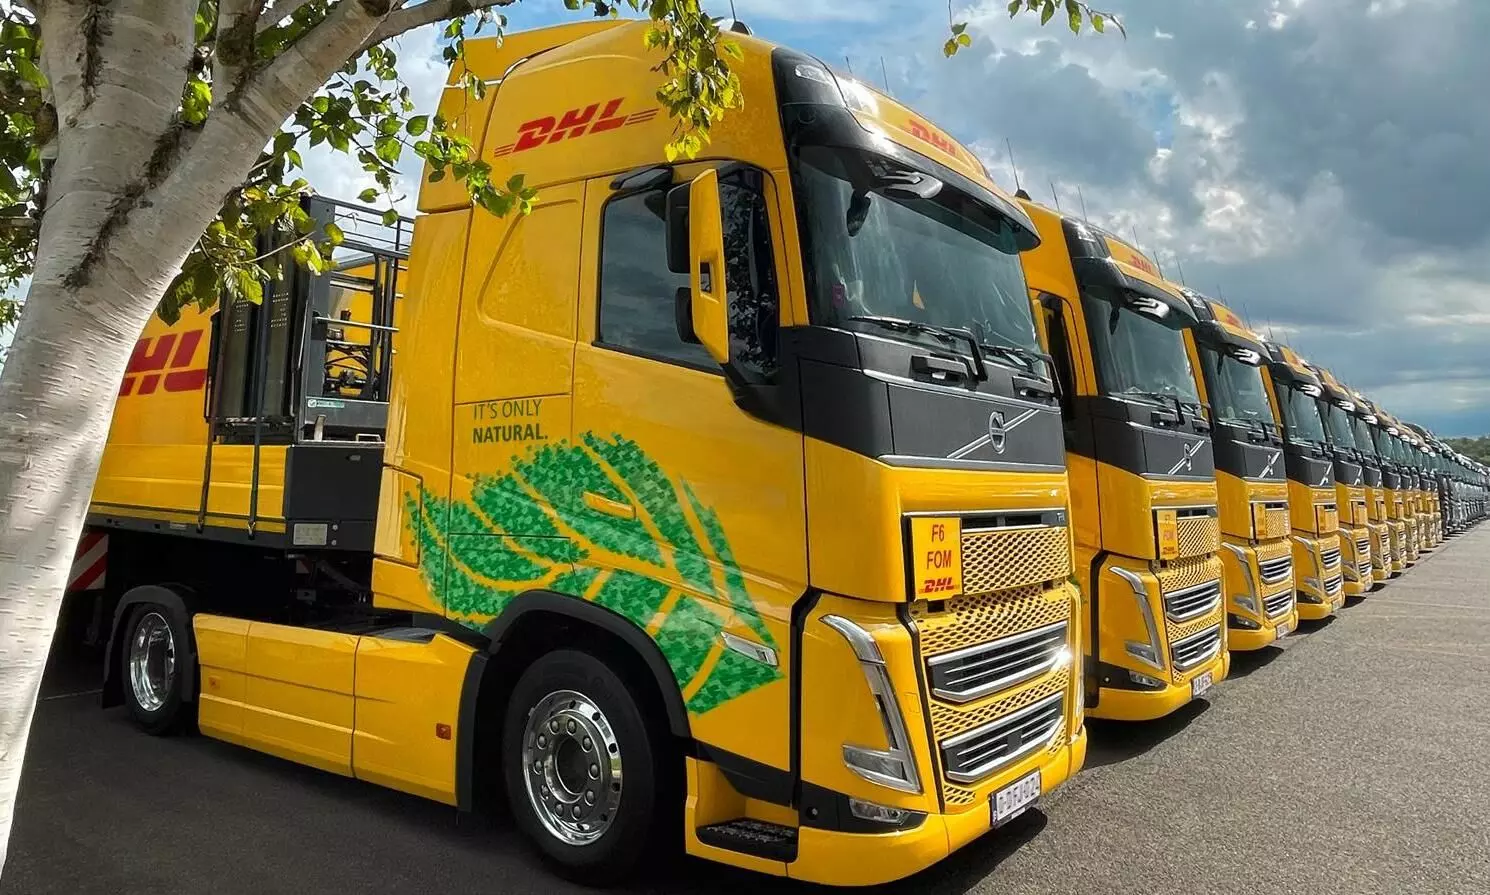 DHL reduces Formula 1 cargo carbon emissions by 83%